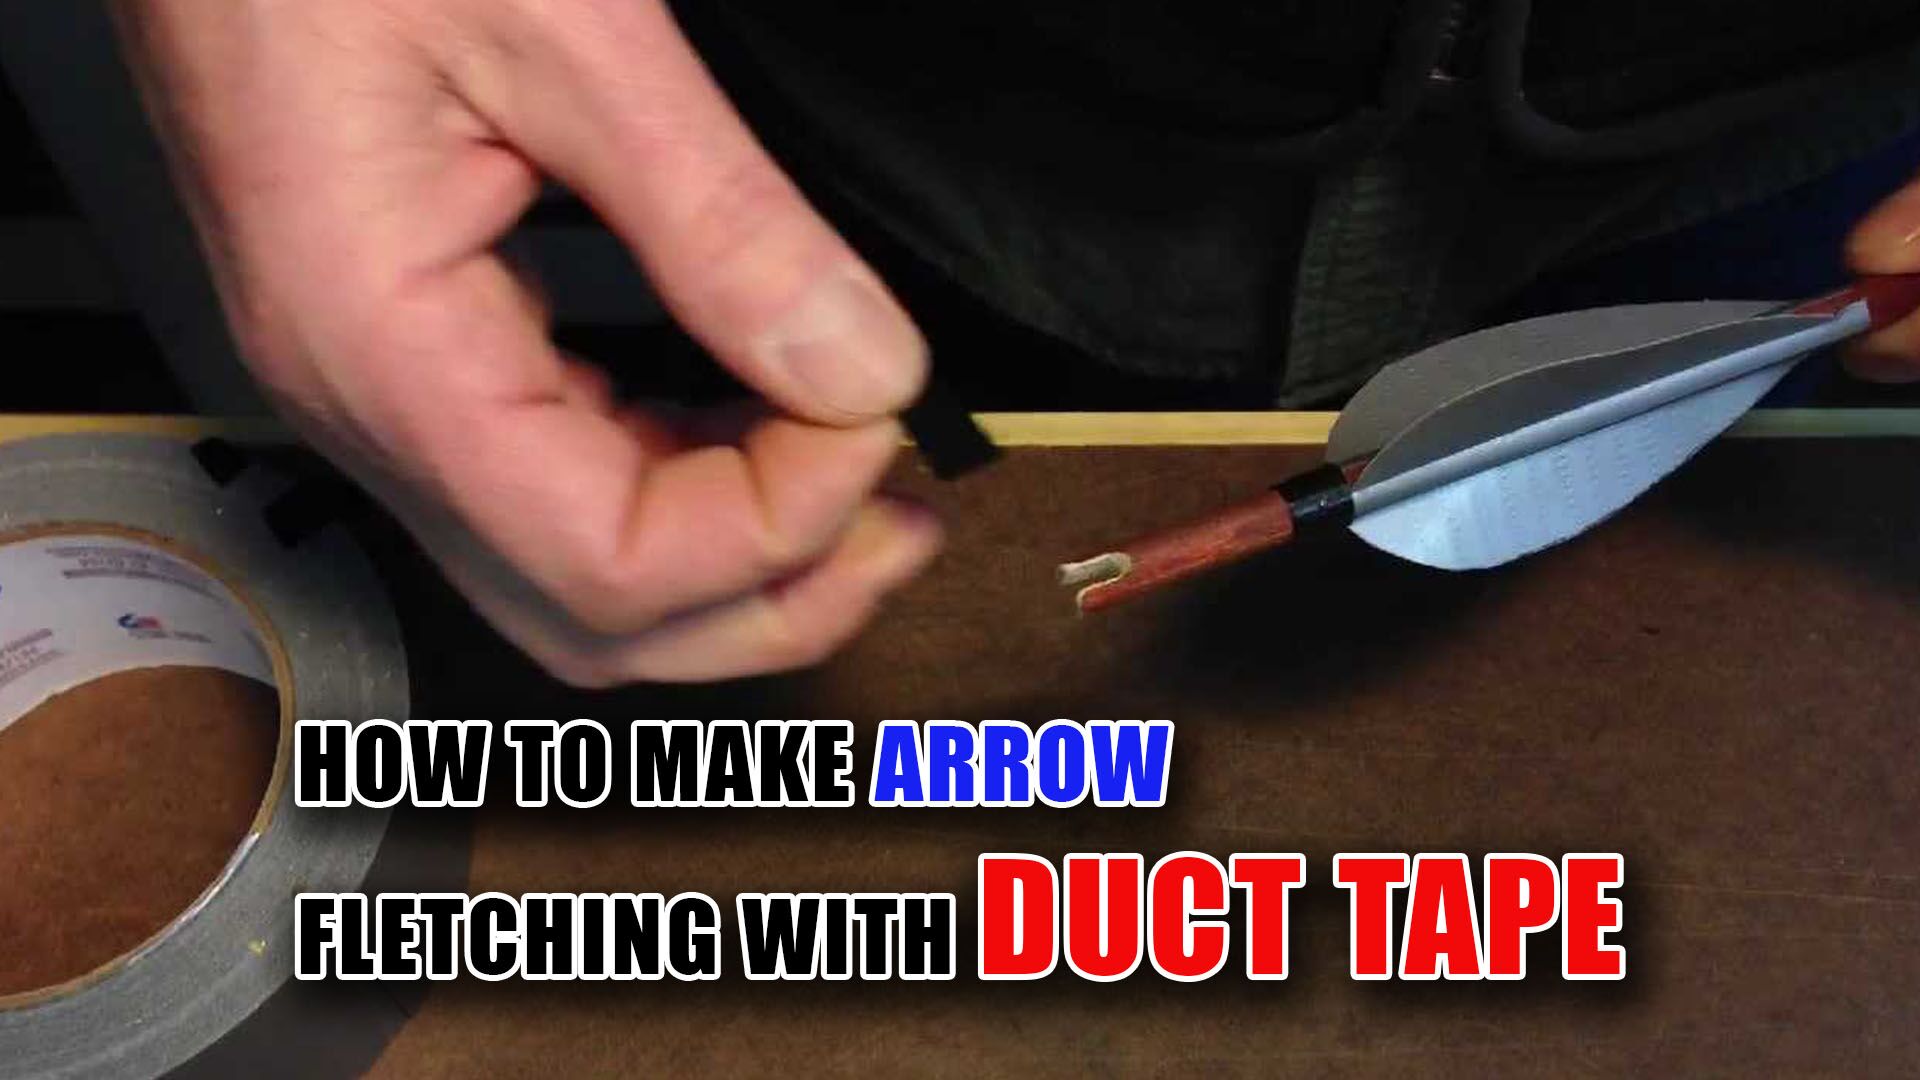 How to Make Arrow Fletching With Duct Tape